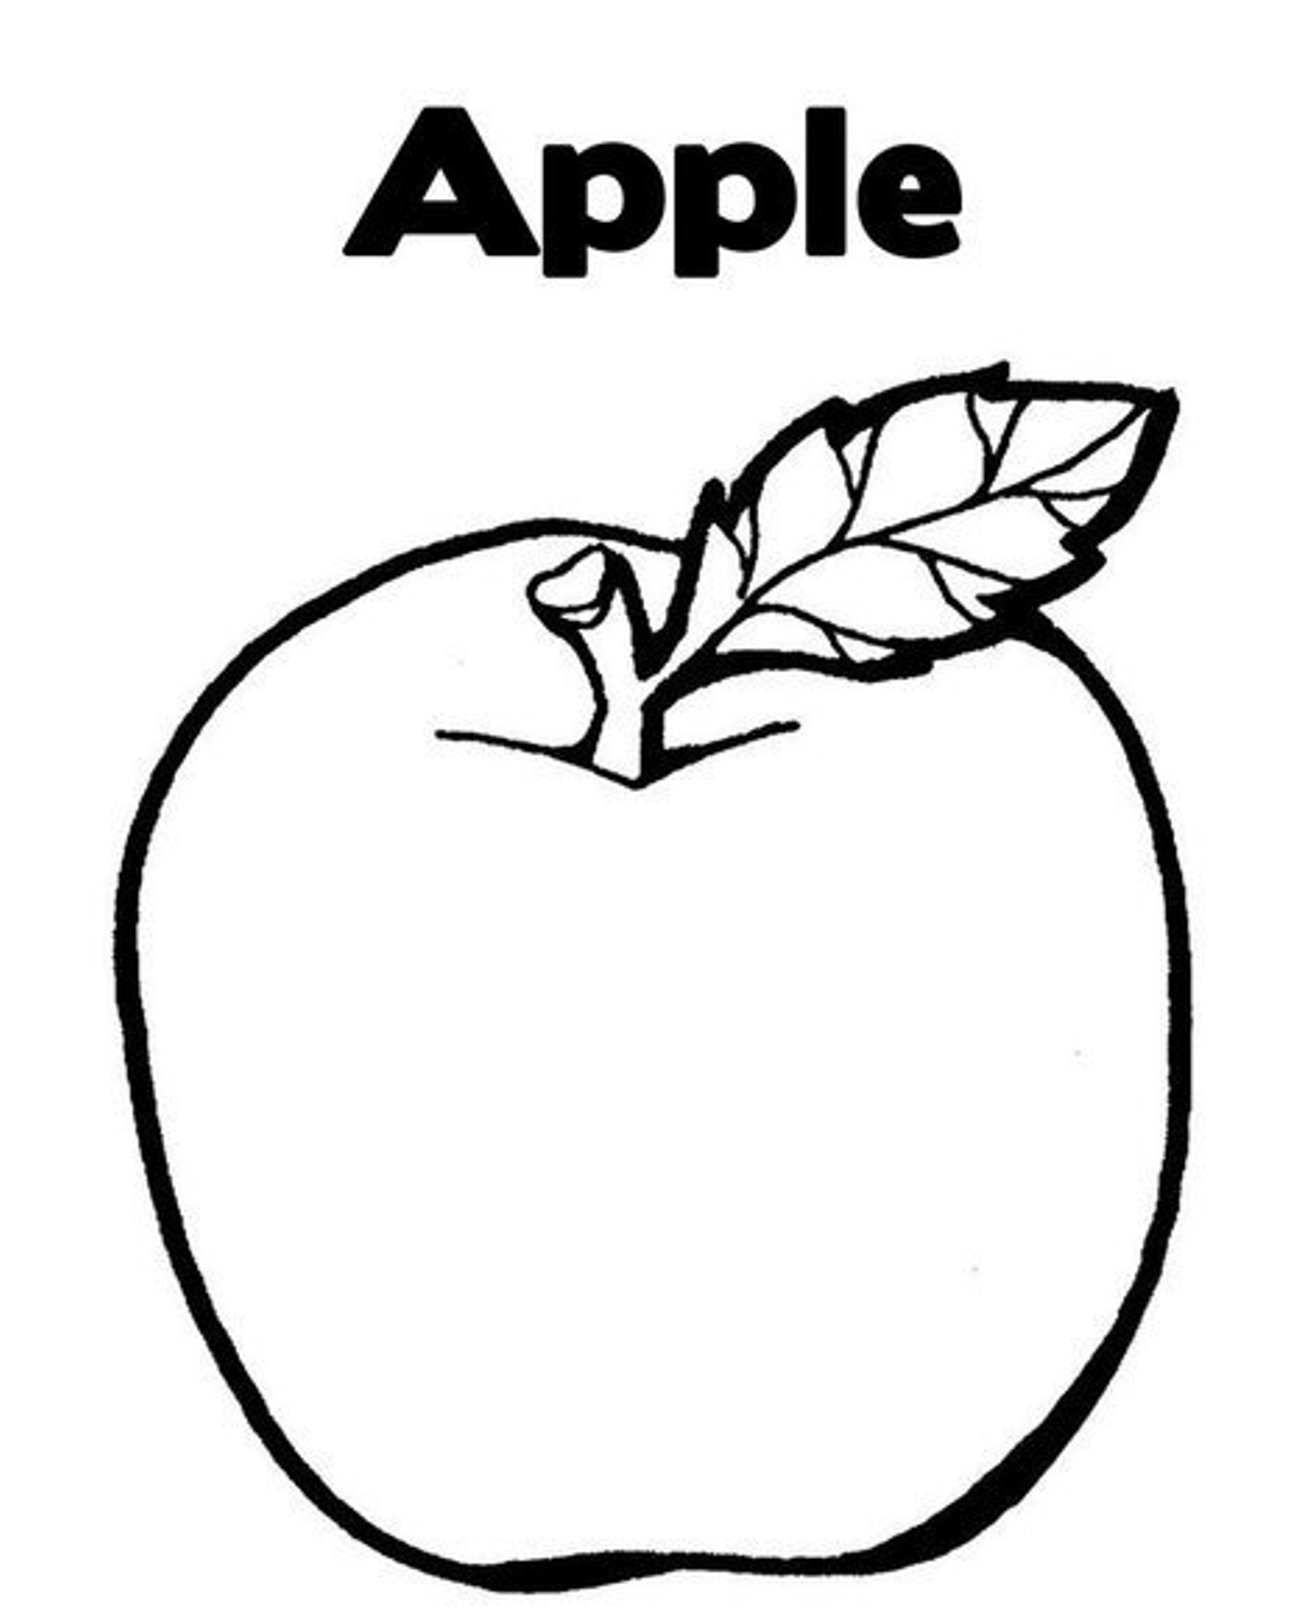 Pix For > Apple Fruit Drawing For Kids